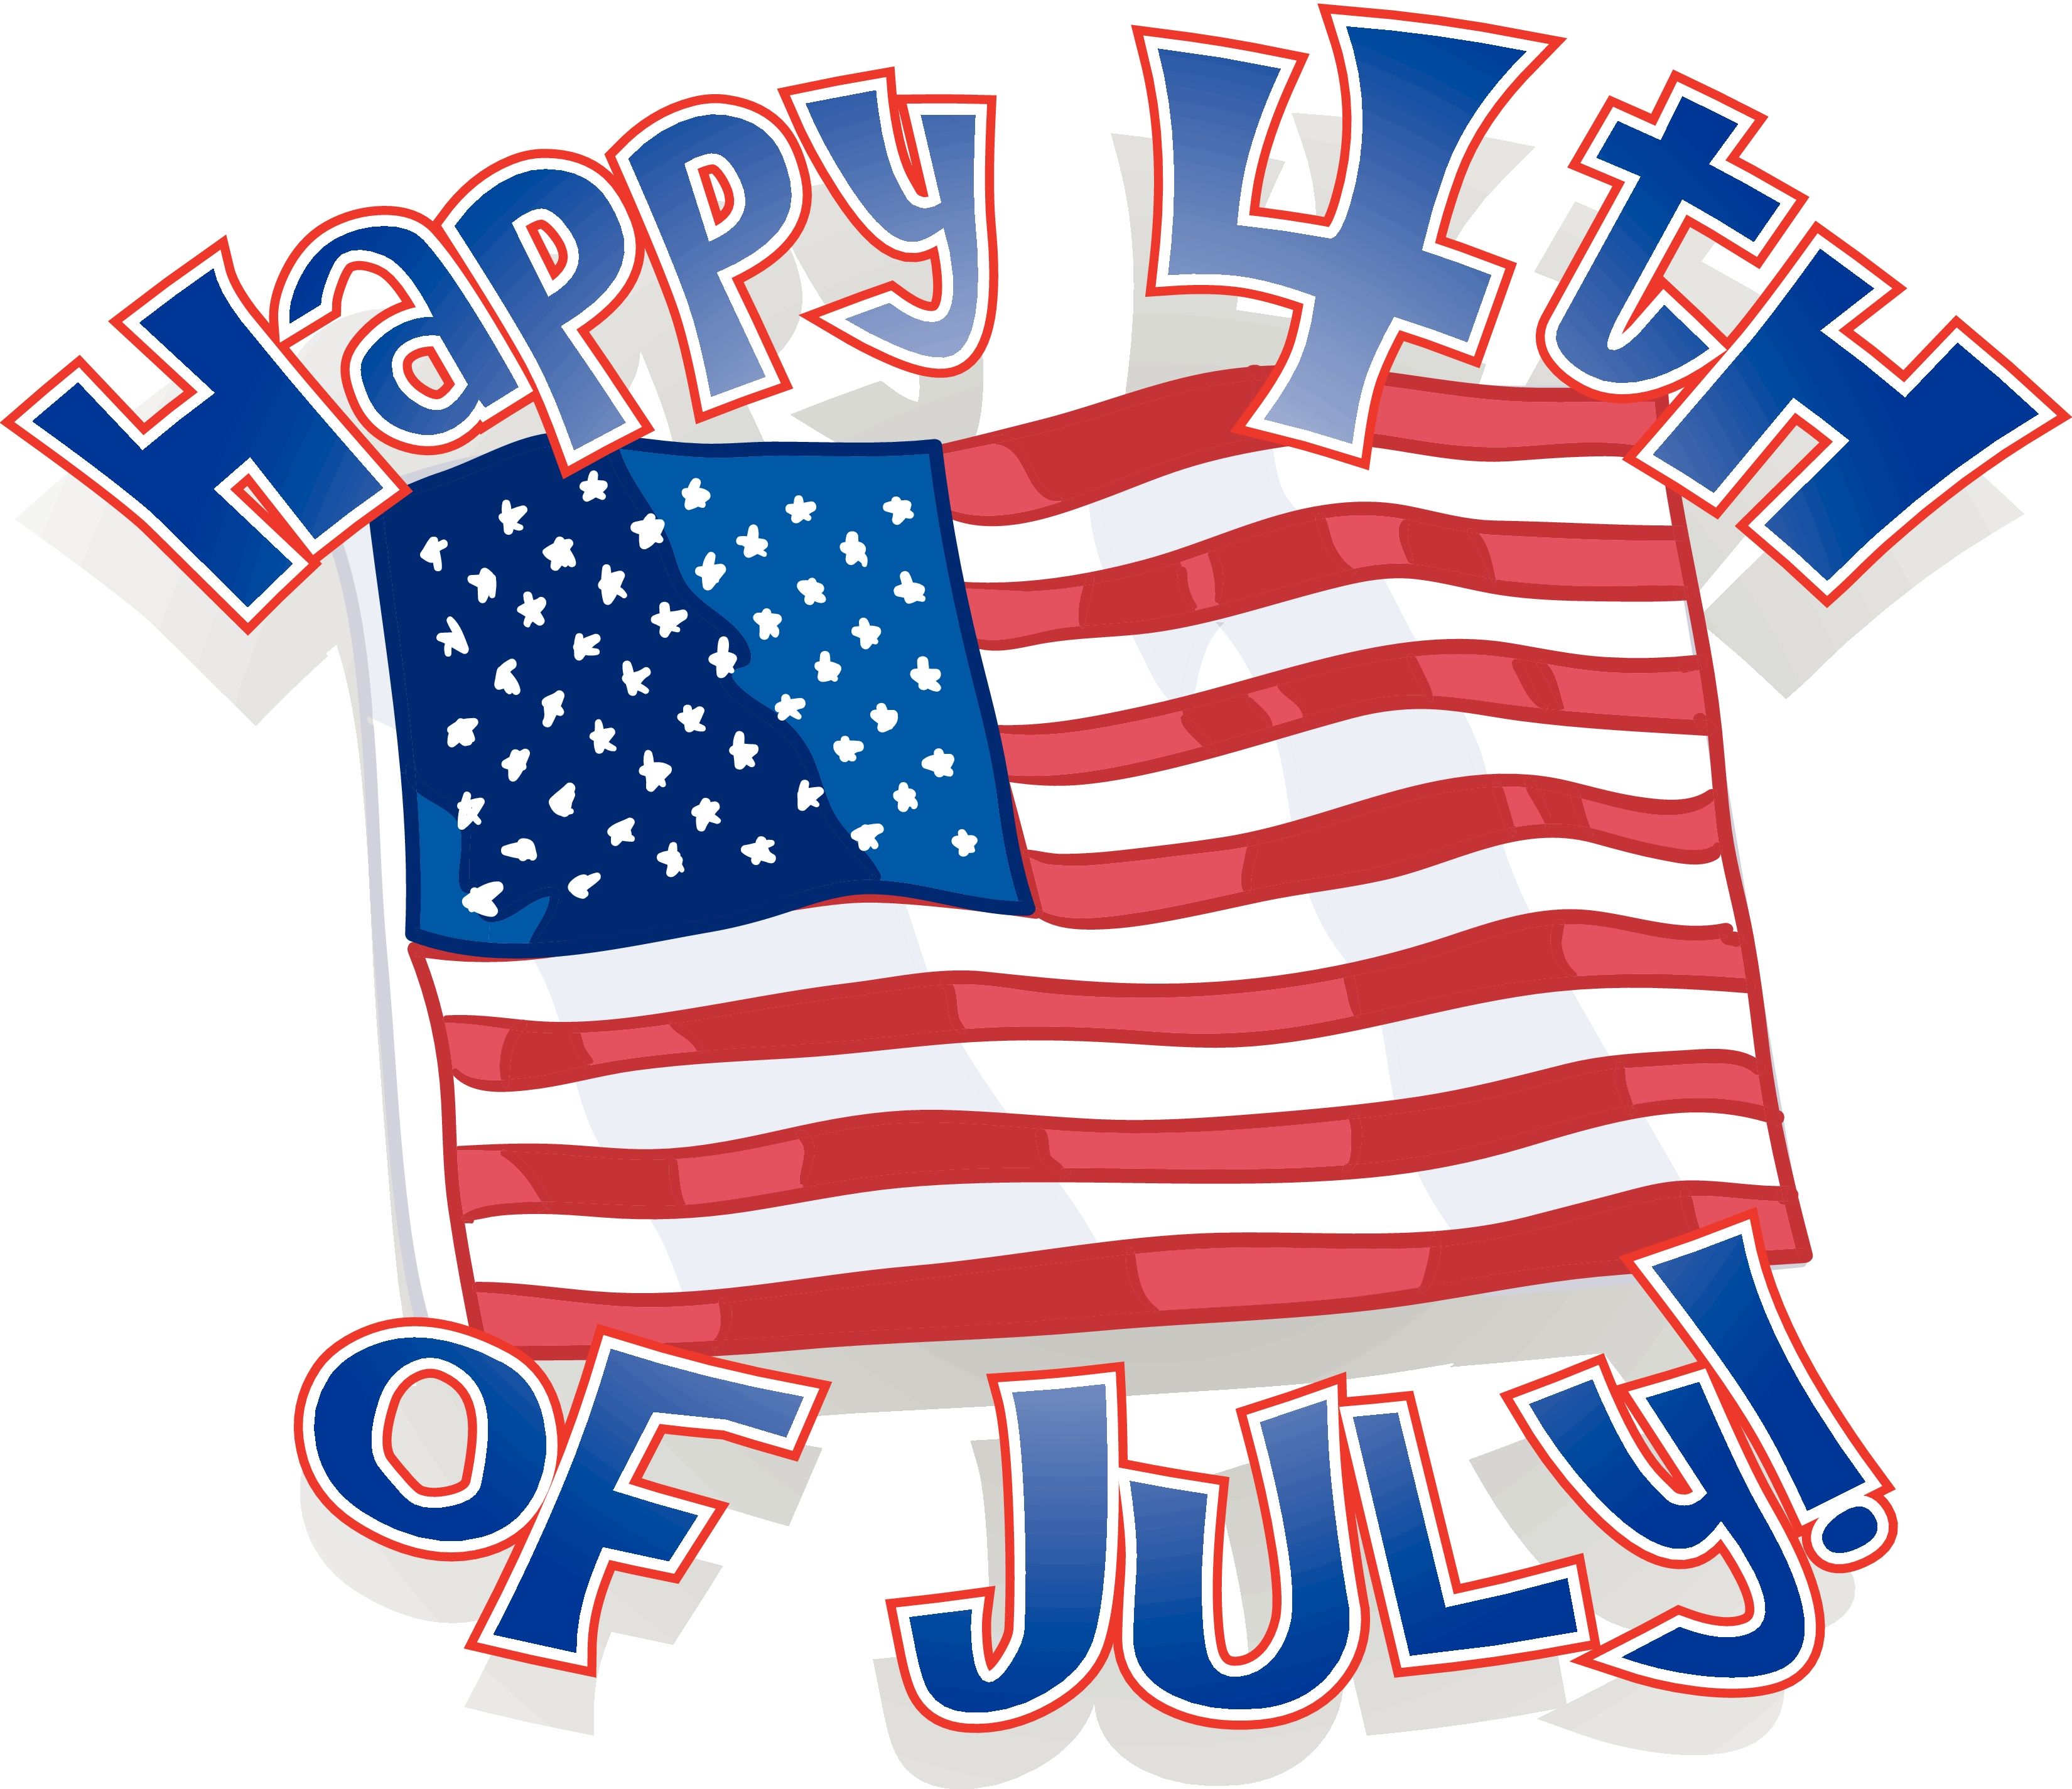 Happy 4th of July 2014 Sign T